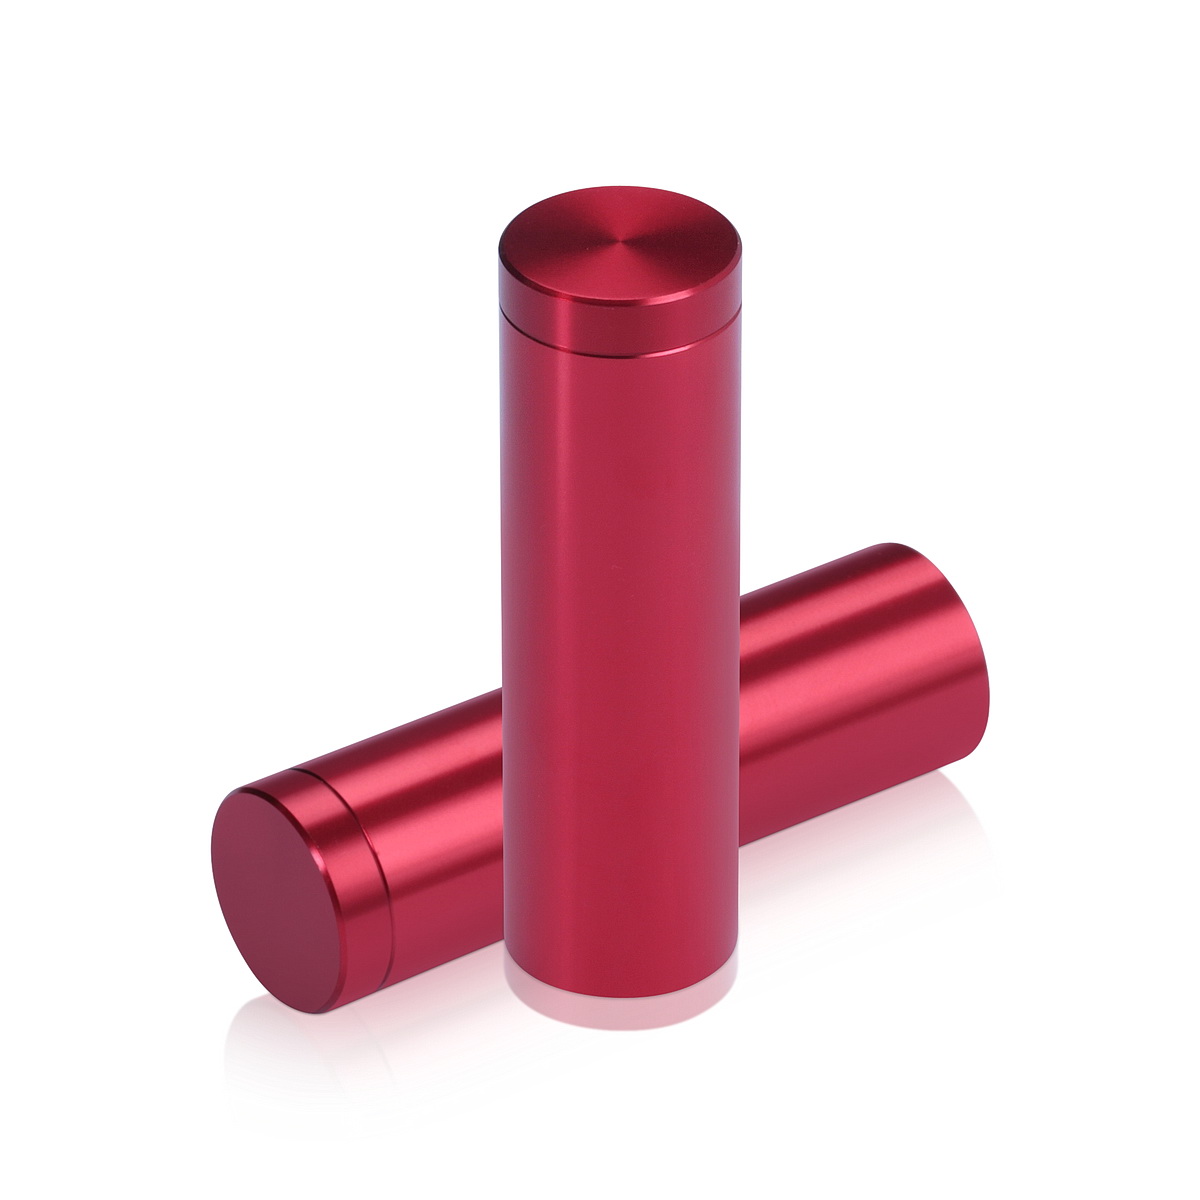 5/8'' Diameter X 2'' Barrel Length, Affordable Aluminum Standoffs, Cherry Red Anodized Finish Easy Fasten Standoff (For Inside / Outside use) [Required Material Hole Size: 7/16'']